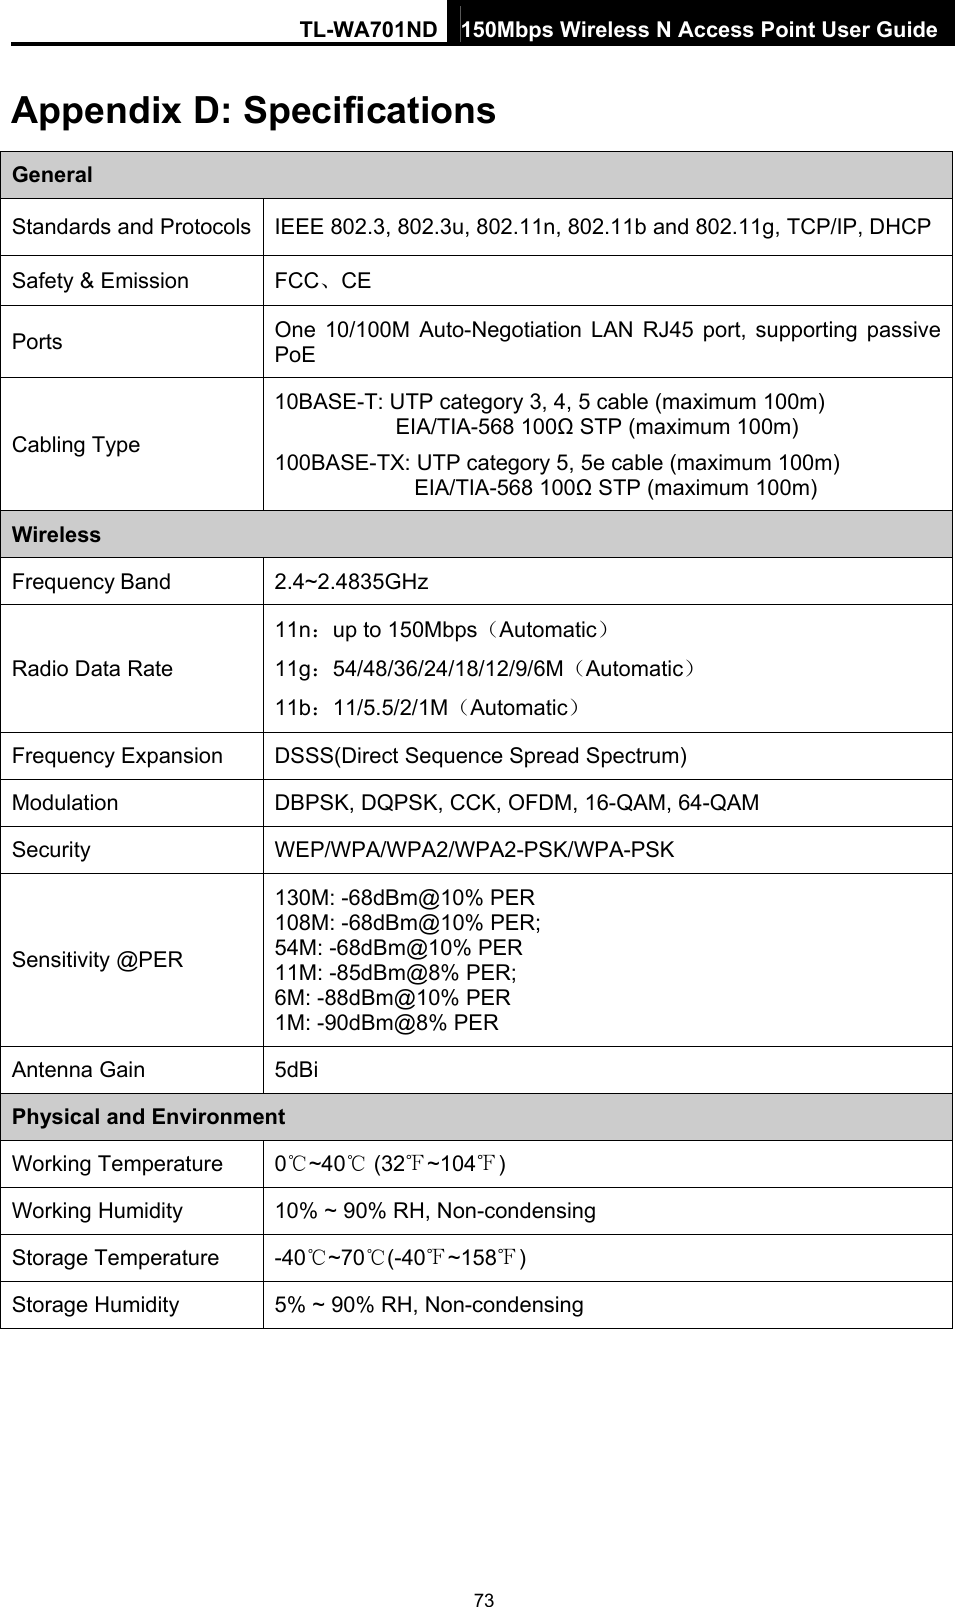 TL-WA701ND 150Mbps Wireless N Access Point User Guide Appendix D: Specifications General Standards and Protocols  IEEE 802.3, 802.3u, 802.11n, 802.11b and 802.11g, TCP/IP, DHCP Safety &amp; Emission  FCC、CE Ports  One 10/100M Auto-Negotiation LAN RJ45 port, supporting passive PoE Cabling Type 10BASE-T: UTP category 3, 4, 5 cable (maximum 100m) EIA/TIA-568 100Ω STP (maximum 100m) 100BASE-TX: UTP category 5, 5e cable (maximum 100m) EIA/TIA-568 100Ω STP (maximum 100m) Wireless Frequency Band 2.4~2.4835GHz Radio Data Rate 11n：up to 150Mbps（Automatic） 11g：54/48/36/24/18/12/9/6M（Automatic） 11b：11/5.5/2/1M（Automatic） Frequency Expansion  DSSS(Direct Sequence Spread Spectrum) Modulation  DBPSK, DQPSK, CCK, OFDM, 16-QAM, 64-QAM Security WEP/WPA/WPA2/WPA2-PSK/WPA-PSK Sensitivity @PER 130M: -68dBm@10% PER 108M: -68dBm@10% PER;   54M: -68dBm@10% PER 11M: -85dBm@8% PER;   6M: -88dBm@10% PER 1M: -90dBm@8% PER Antenna Gain  5dBi Physical and Environment Working Temperature 0℃~40  (32℃~104℉℉) Working Humidity  10% ~ 90% RH, Non-condensing Storage Temperature  -40 ~70 (℃℃-40 ~158℉)℉ Storage Humidity  5% ~ 90% RH, Non-condensing  73 